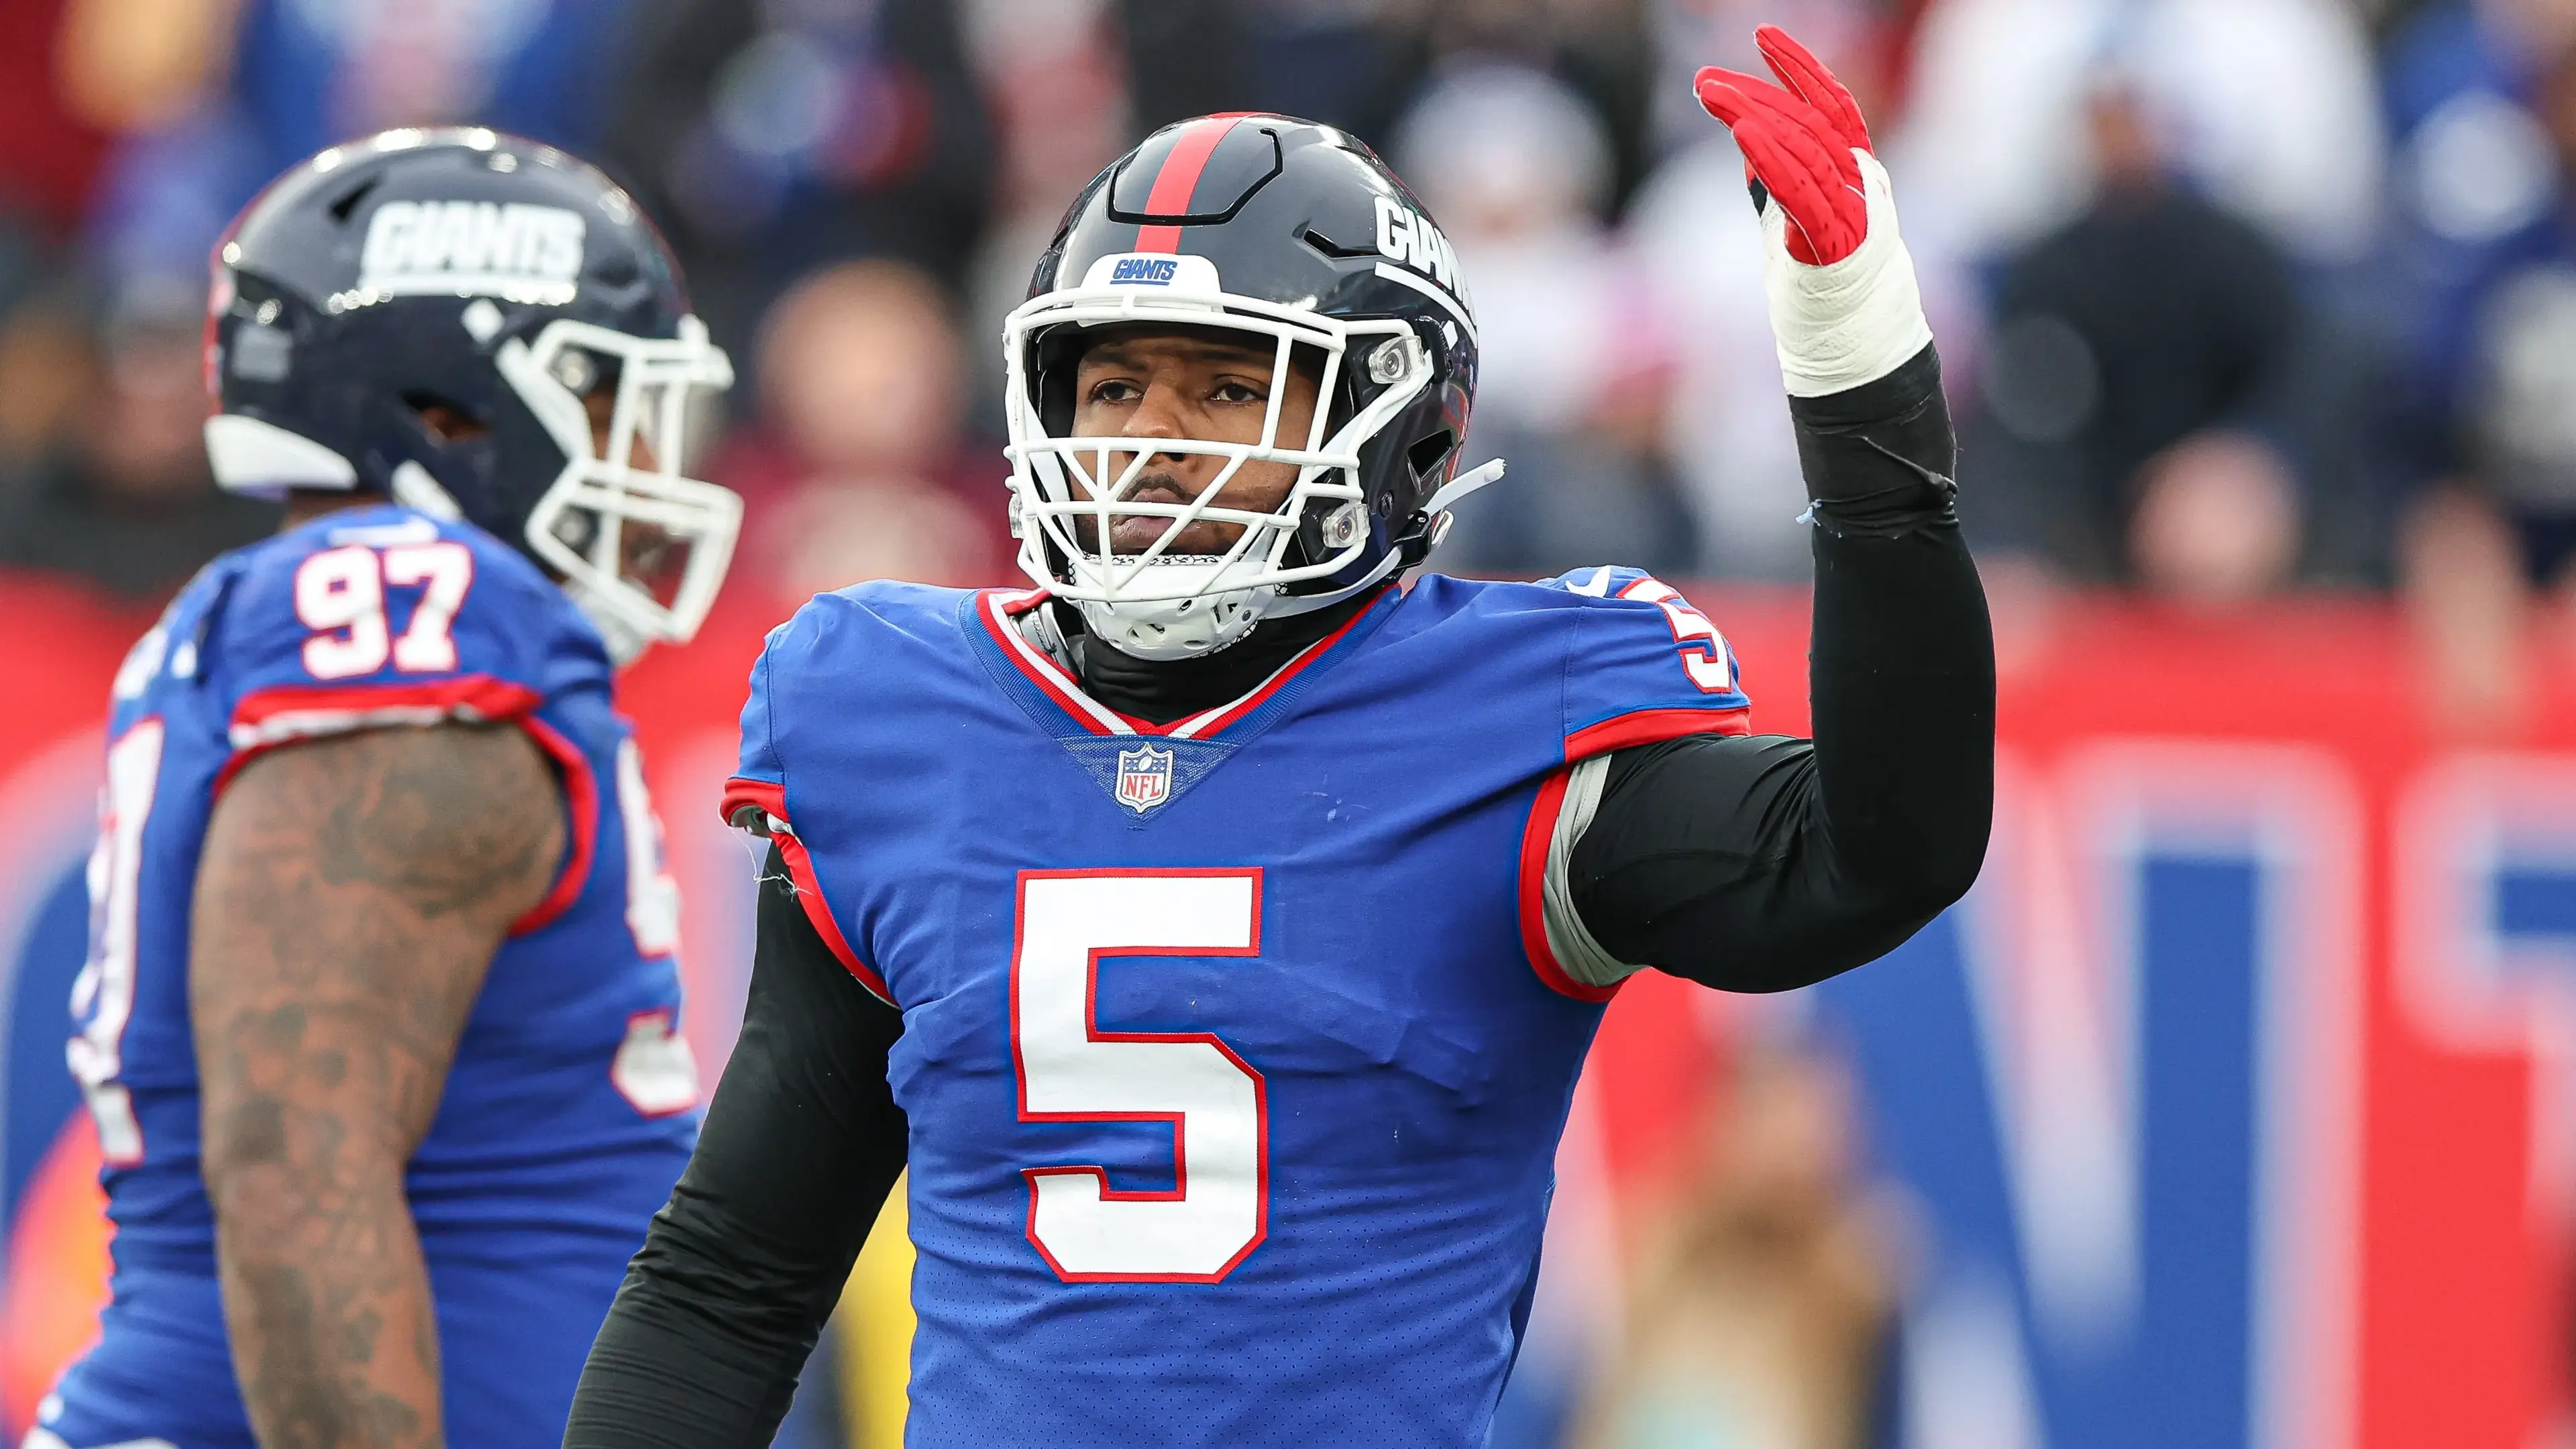 New York Giants defensive end Kayvon Thibodeaux (5) gestures to fans during the second half against the Washington Commanders at MetLife Stadium / Vincent Carchietta - USA TODAY Sports